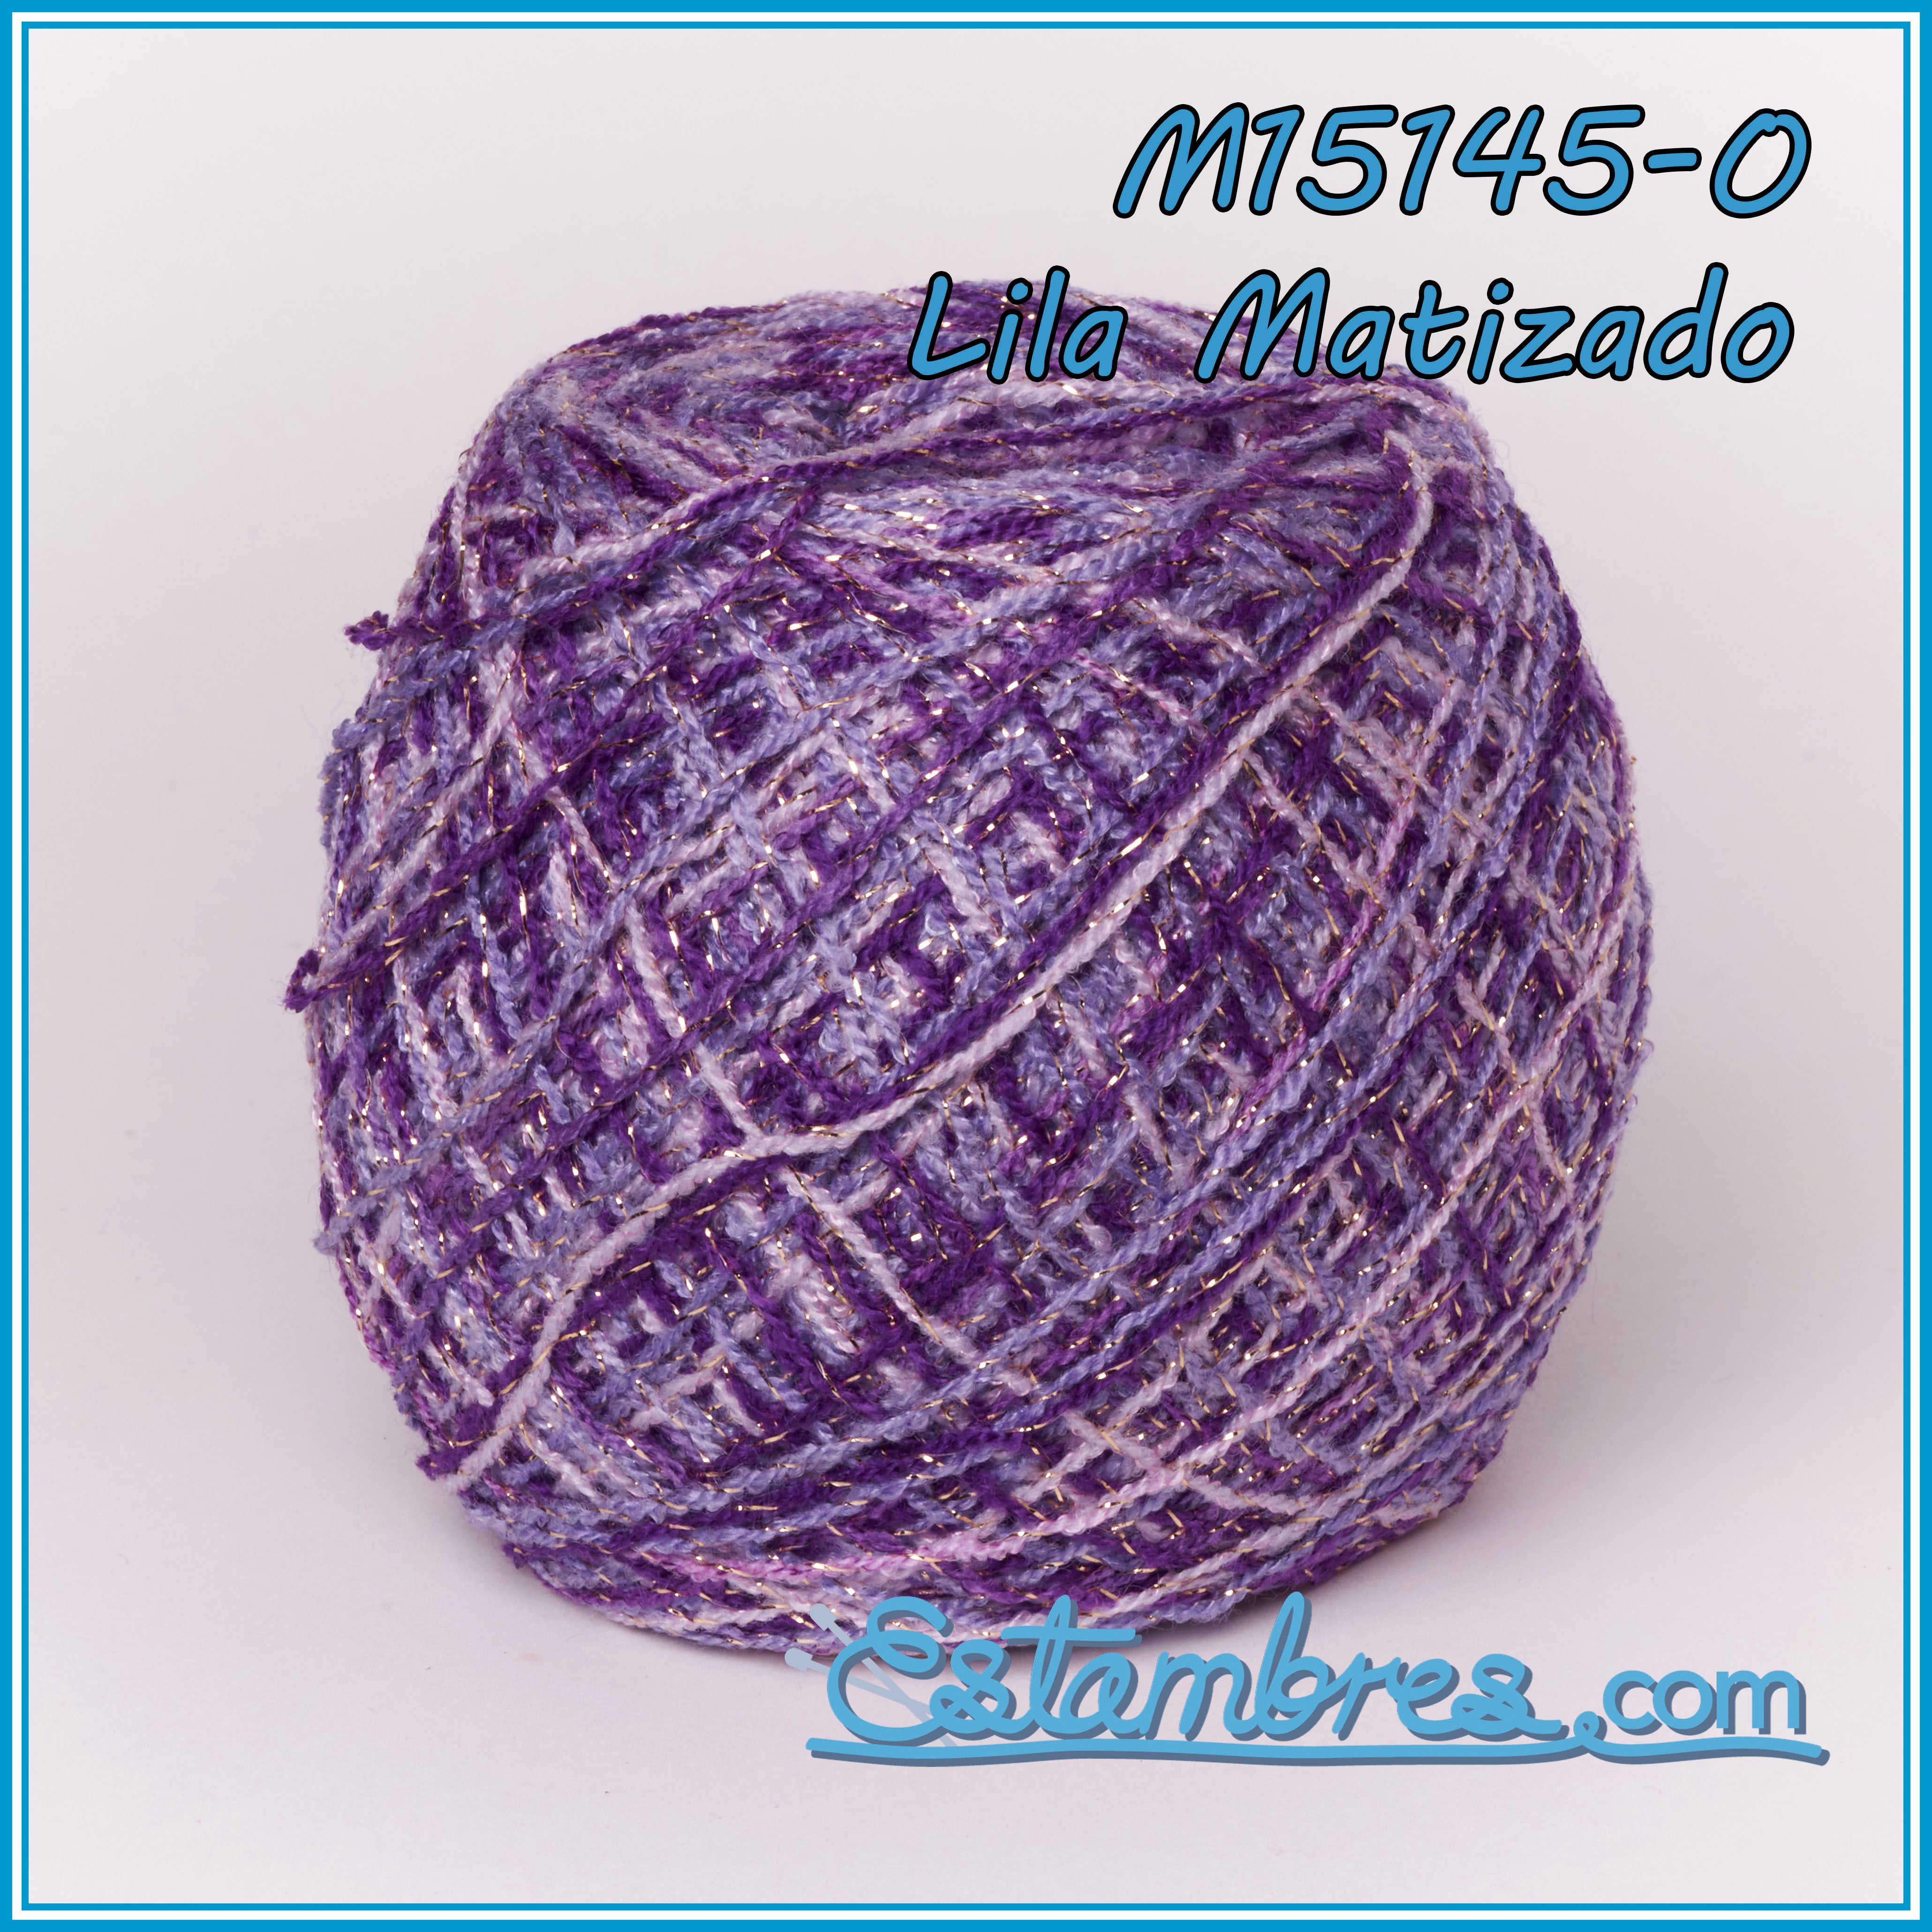 CRYSTAL Metallic 100grs La Pantera Rosa Fine Mexican Crochet Thread Yarn  for Clothing and Crafts 